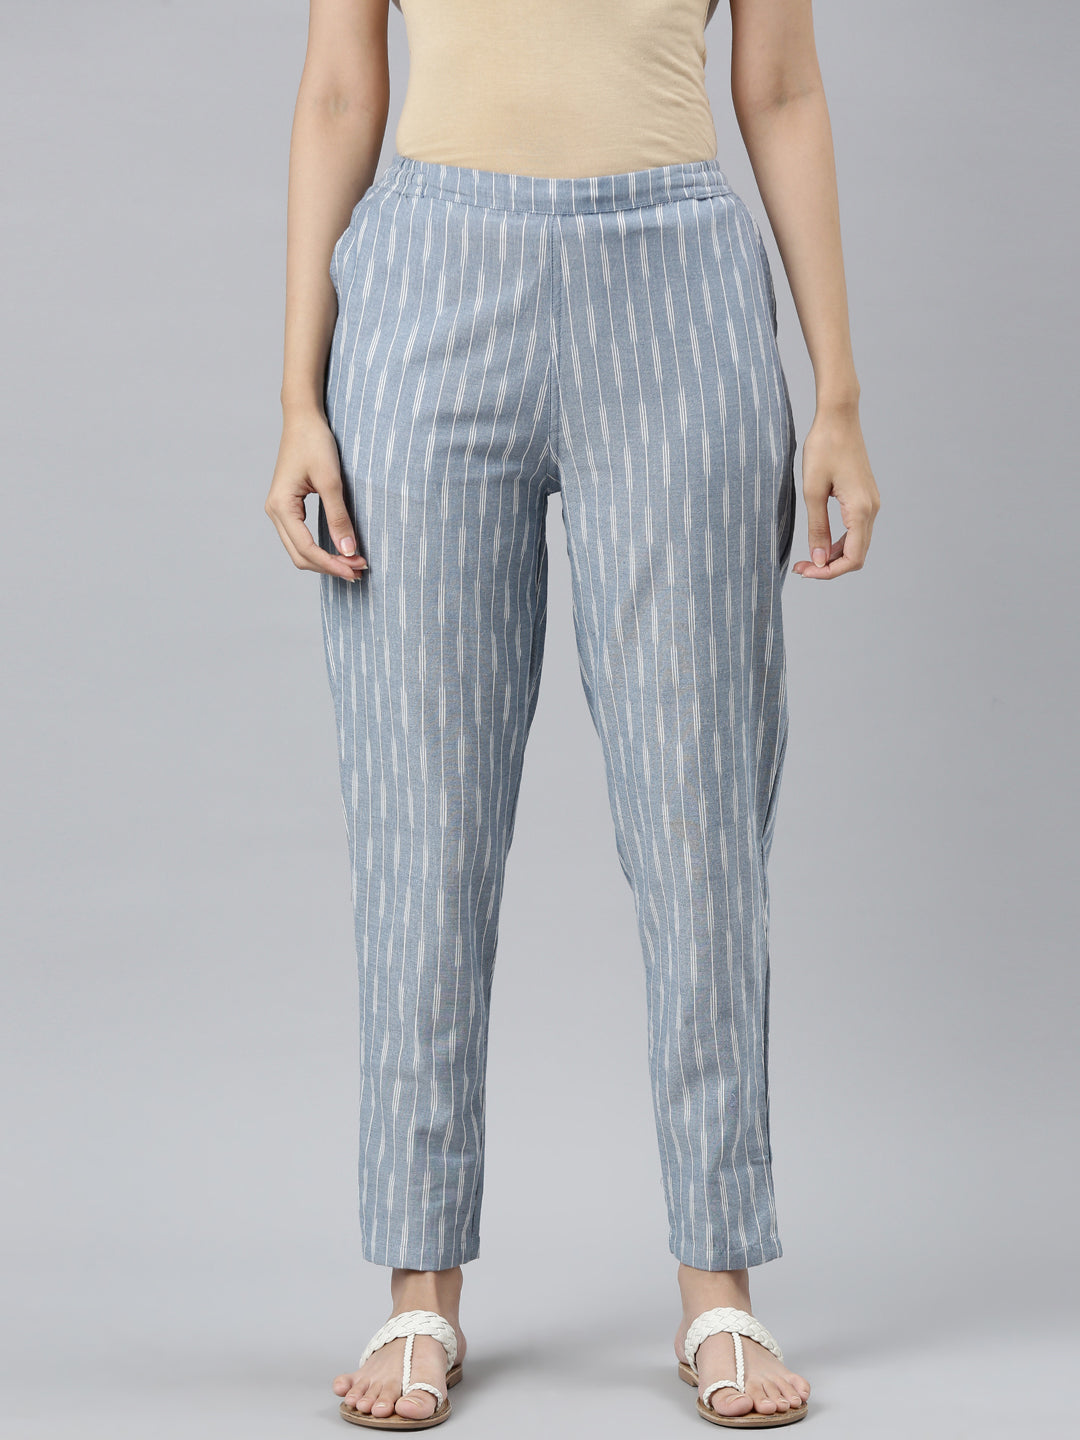 Buy Cream Trousers & Pants for Women by Go Colors Online | Ajio.com